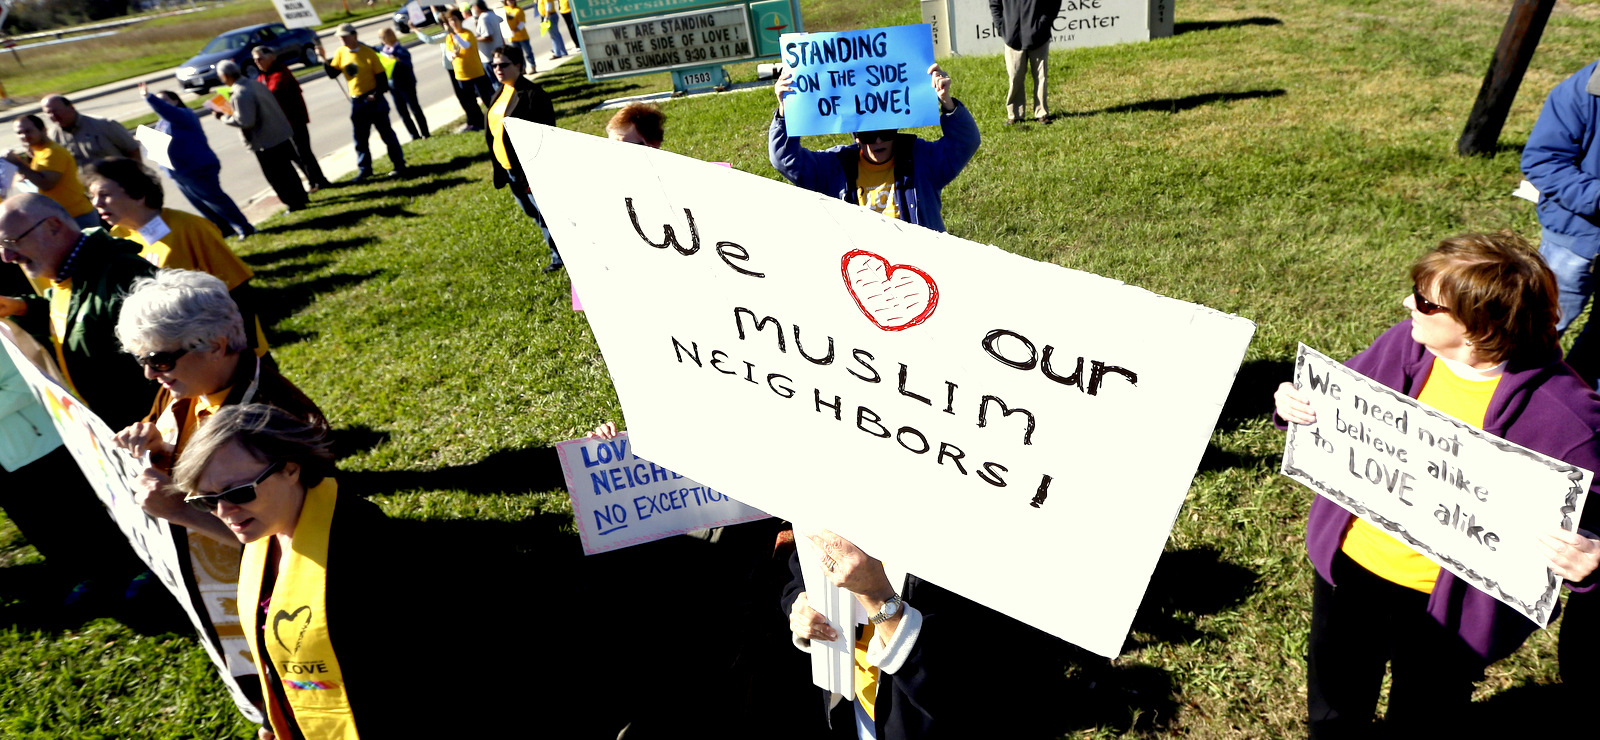 Paula Criswell, center, holds a sign as she joins others in a rally to show support for Muslim members of the community near the Clear Lake Islamic Center in Webster, Texas on Friday, Dec. 4, 2015. Members of several churches showed their support as attendees made their way to the center for Friday prayers. (AP Photo/David J. Phillip)